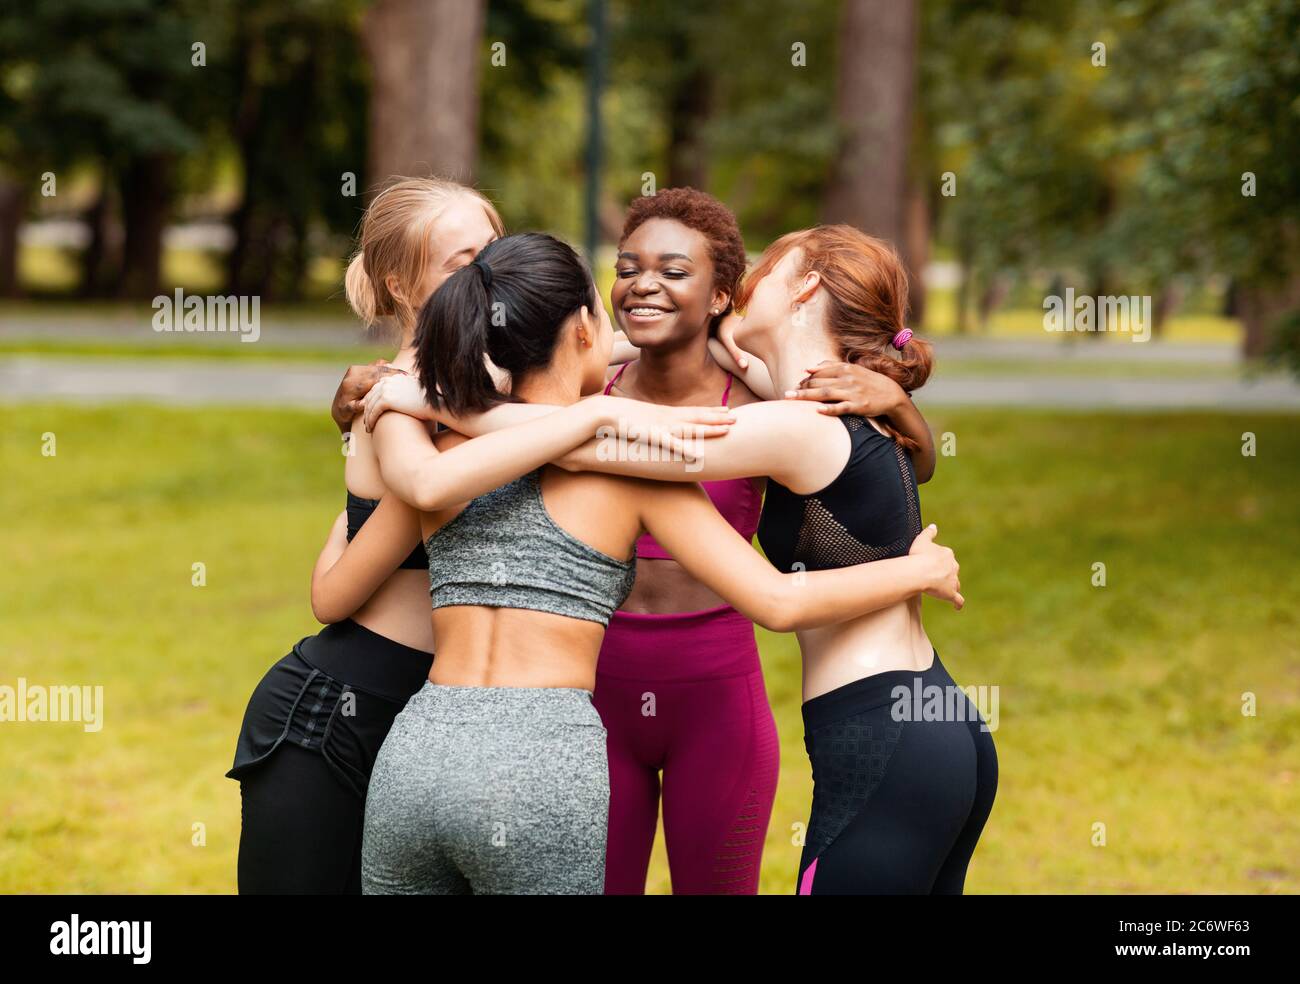 Diverse young girls in sportswear hugging after outdoor yoga class